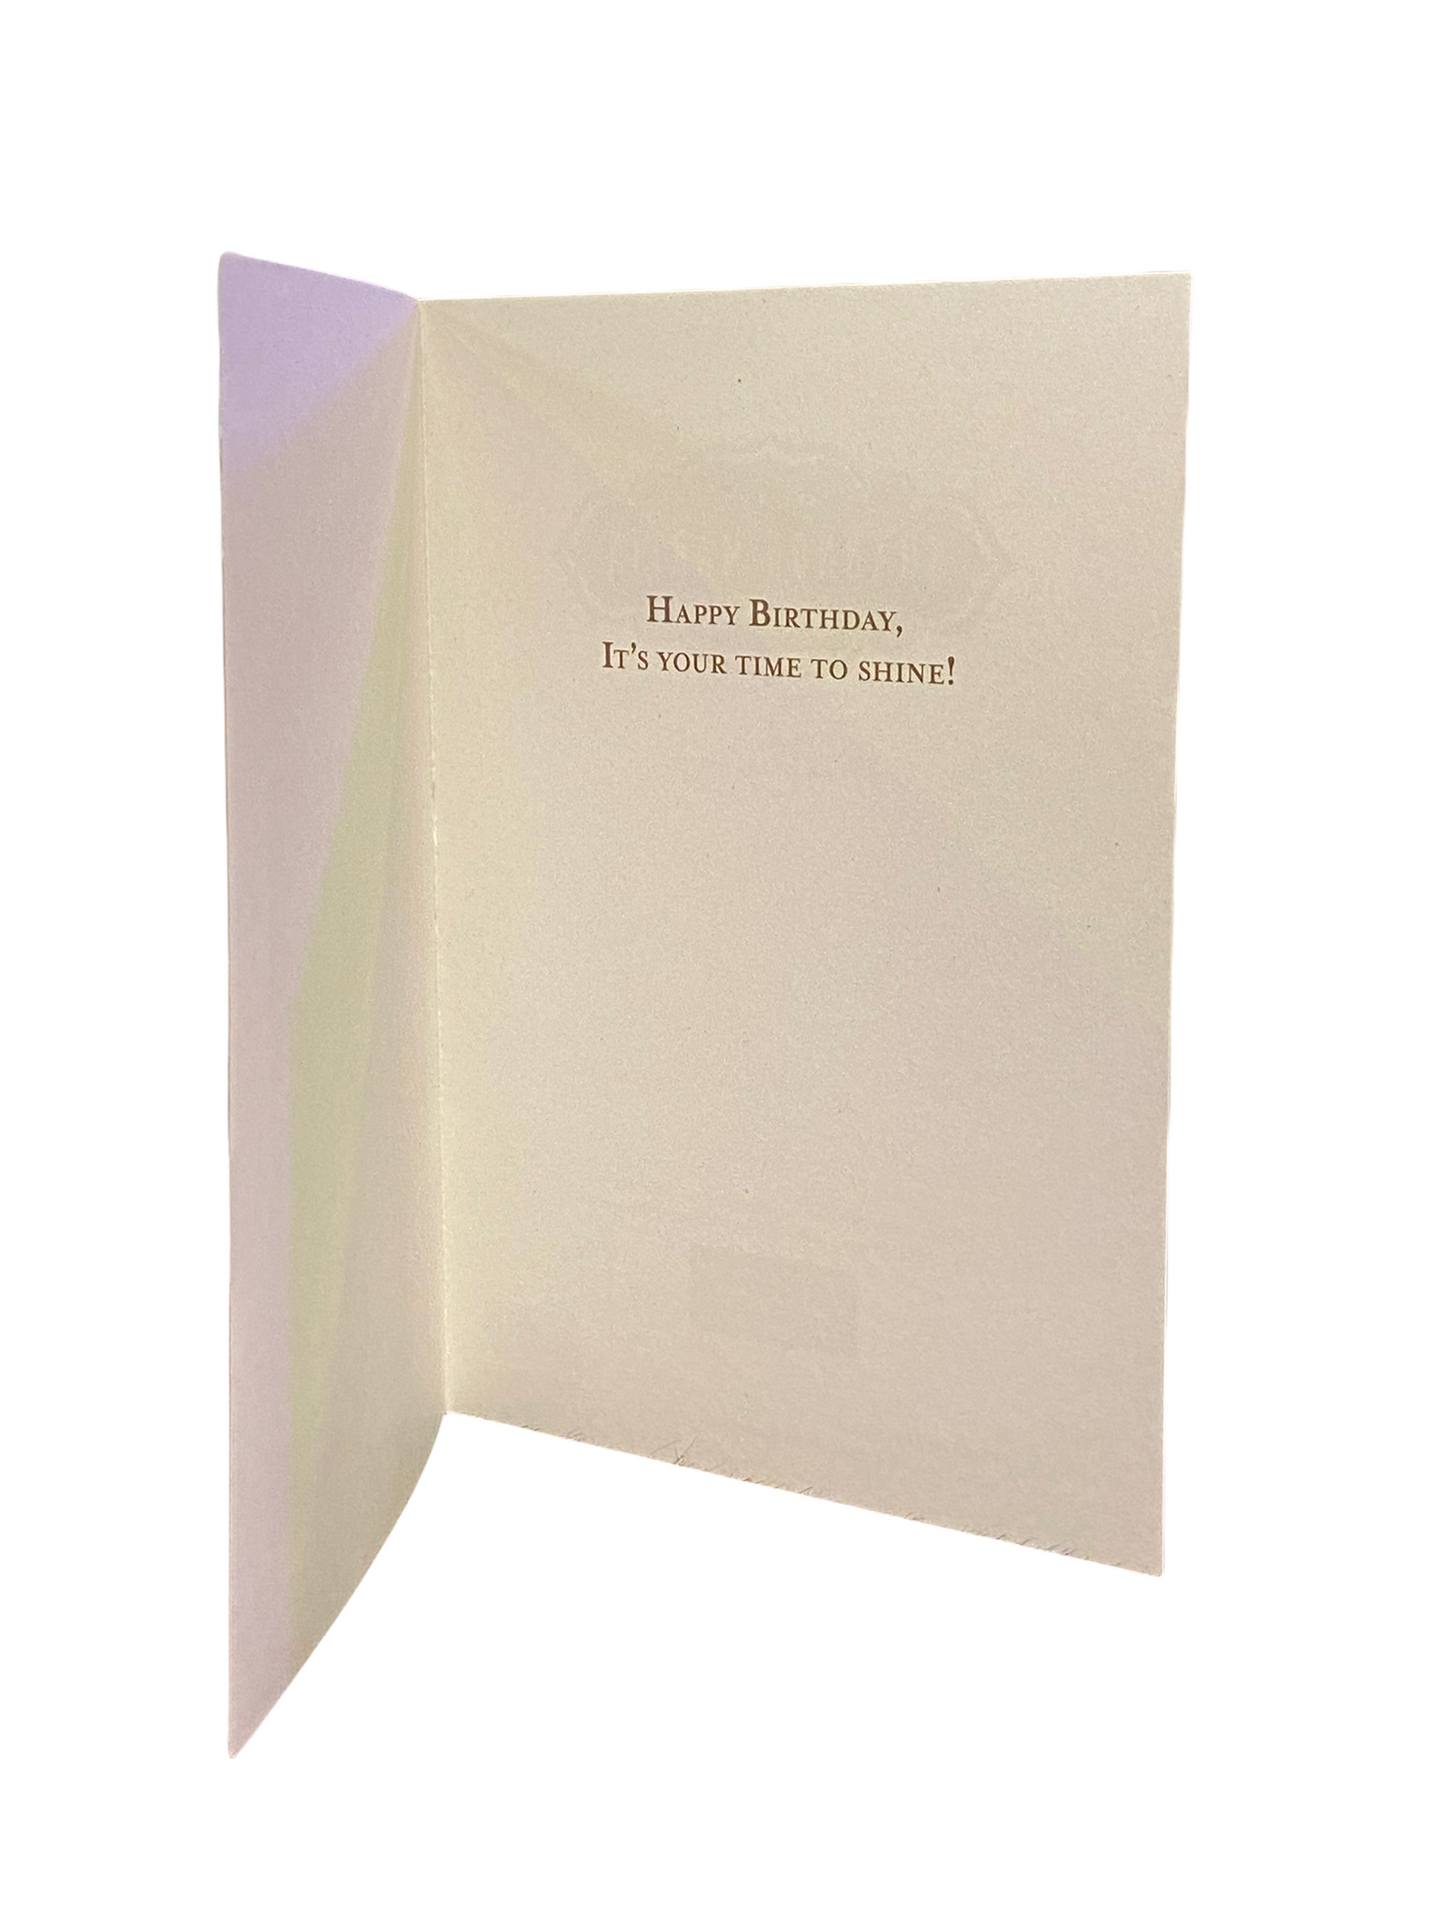 Never Let Anyone Greeting Card (Birthday)